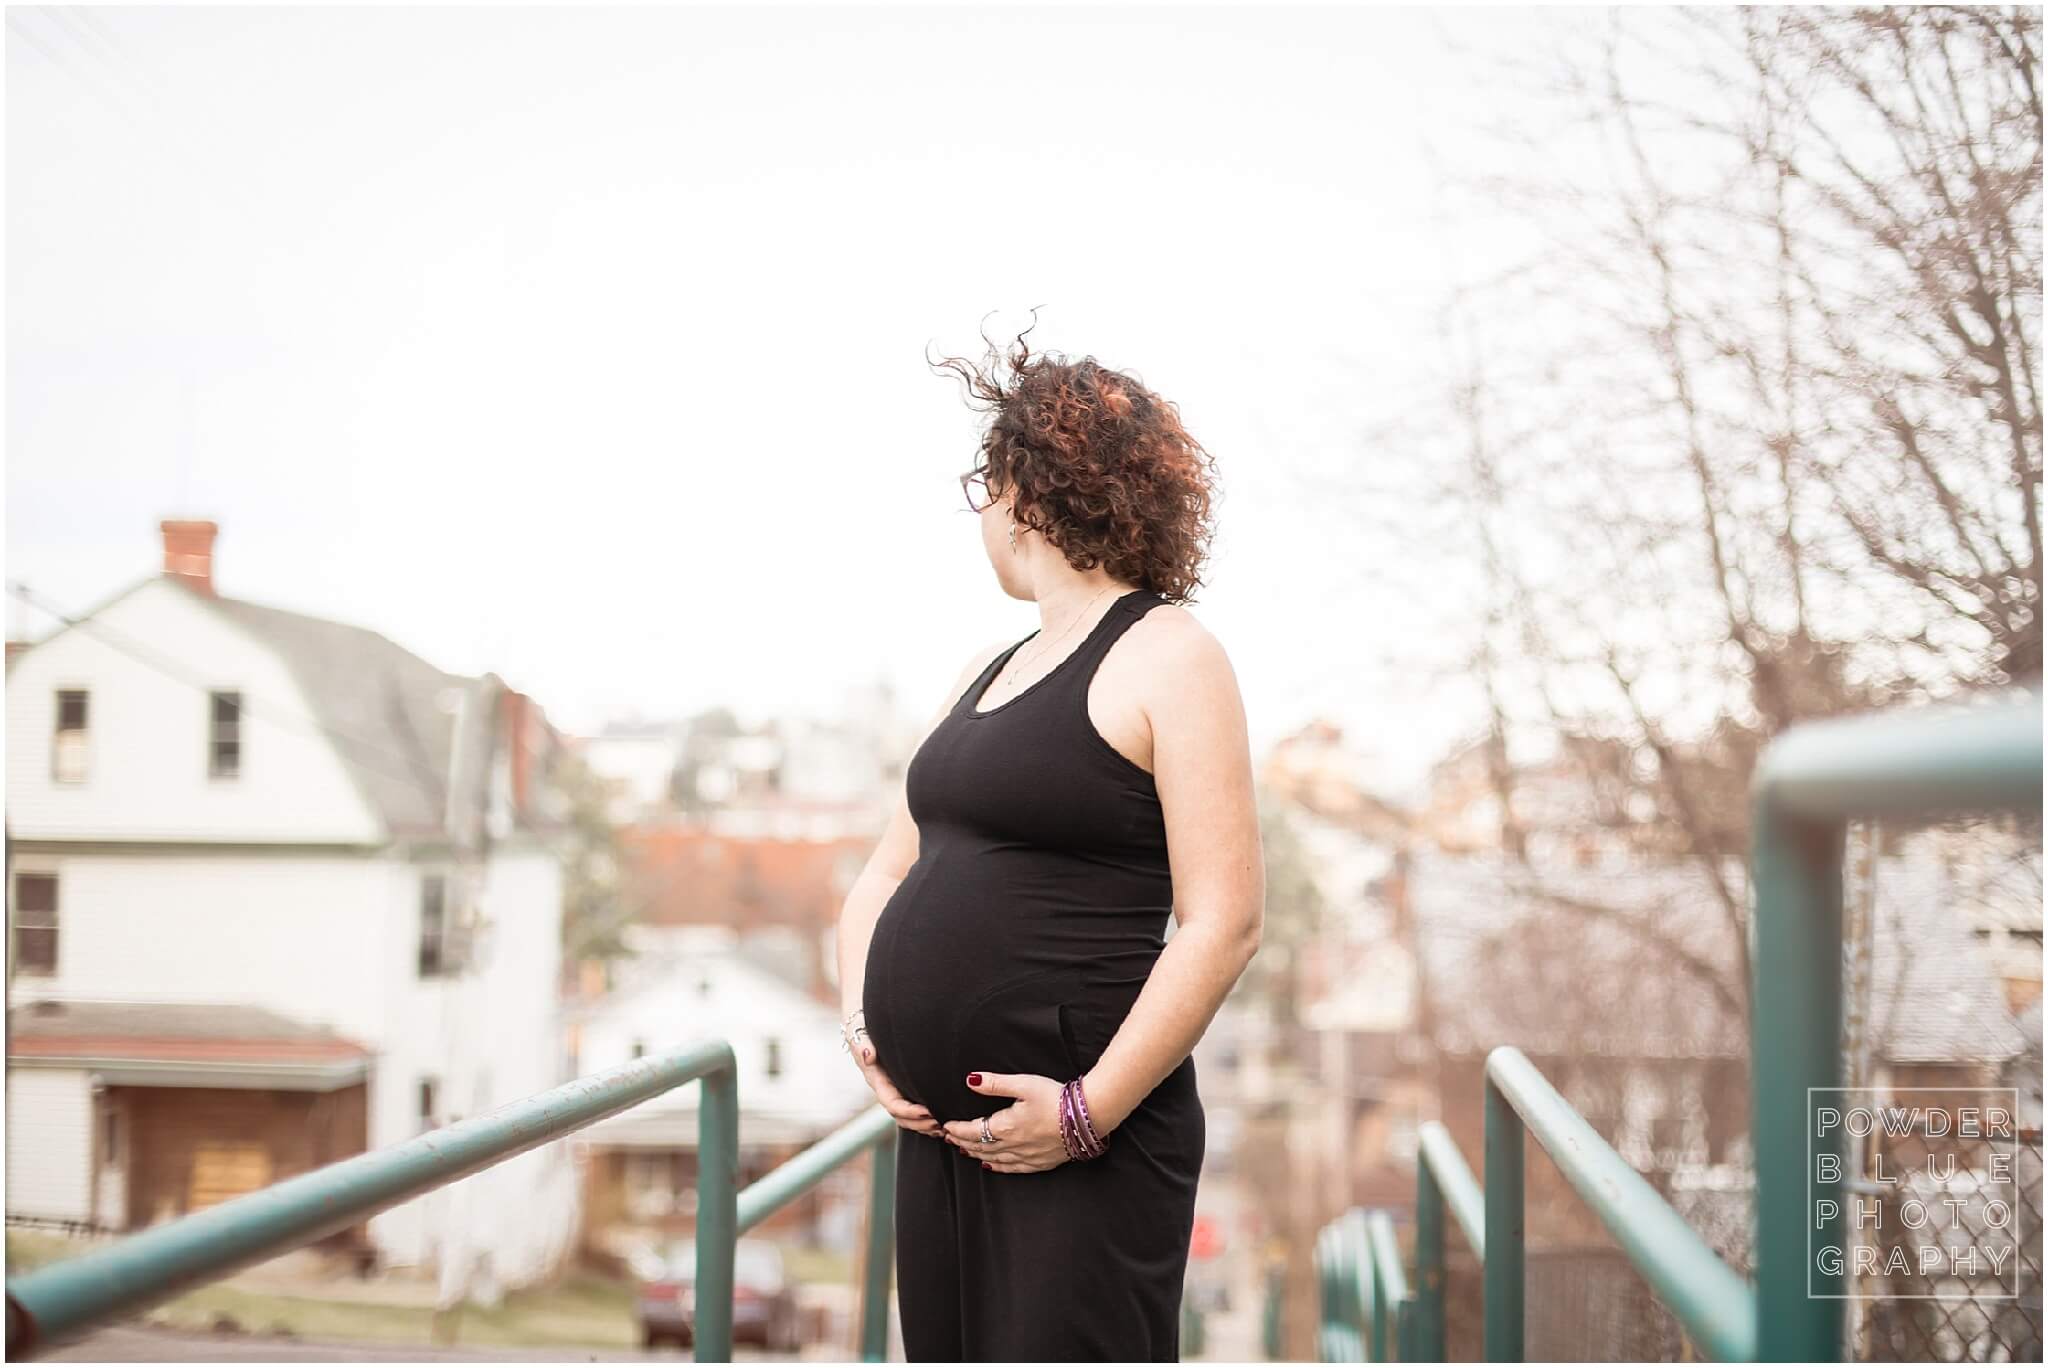 pittsburgh maternity photography session. brookline neighborhood. 7 months pregnant.